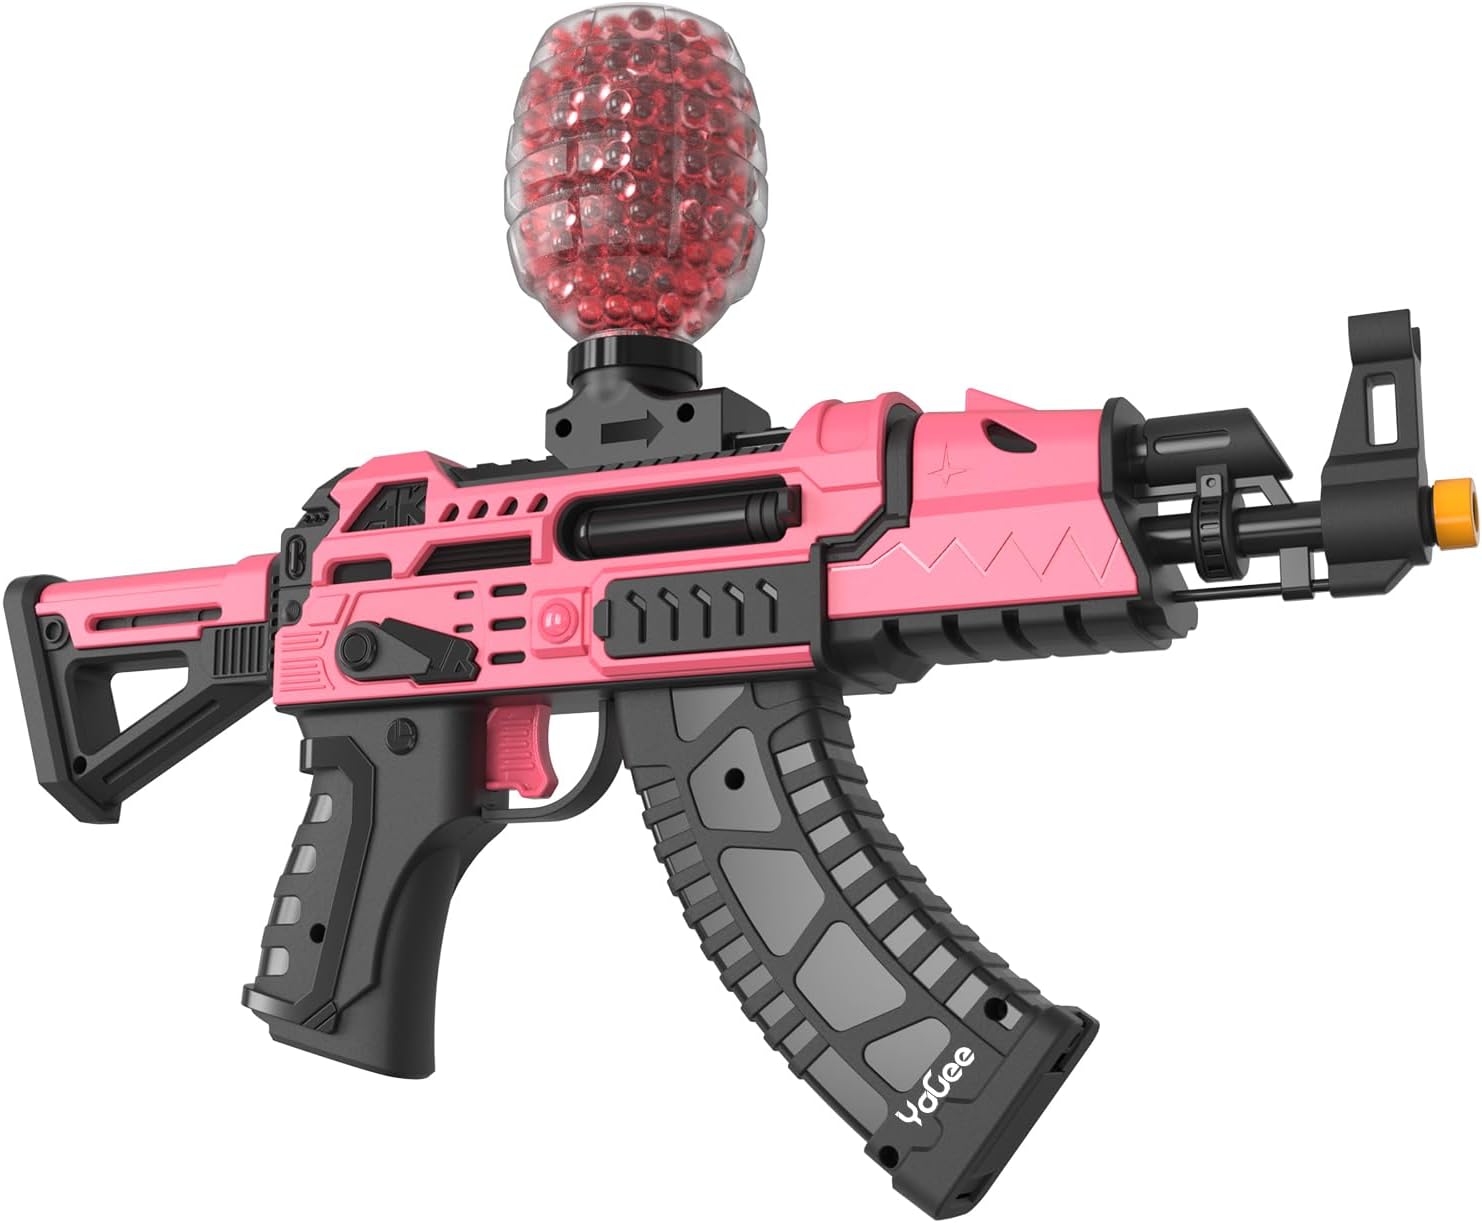 A pink orbeez gun with a pink ball on top, perfect for adults and teens looking for backyard fun and outdoor games.